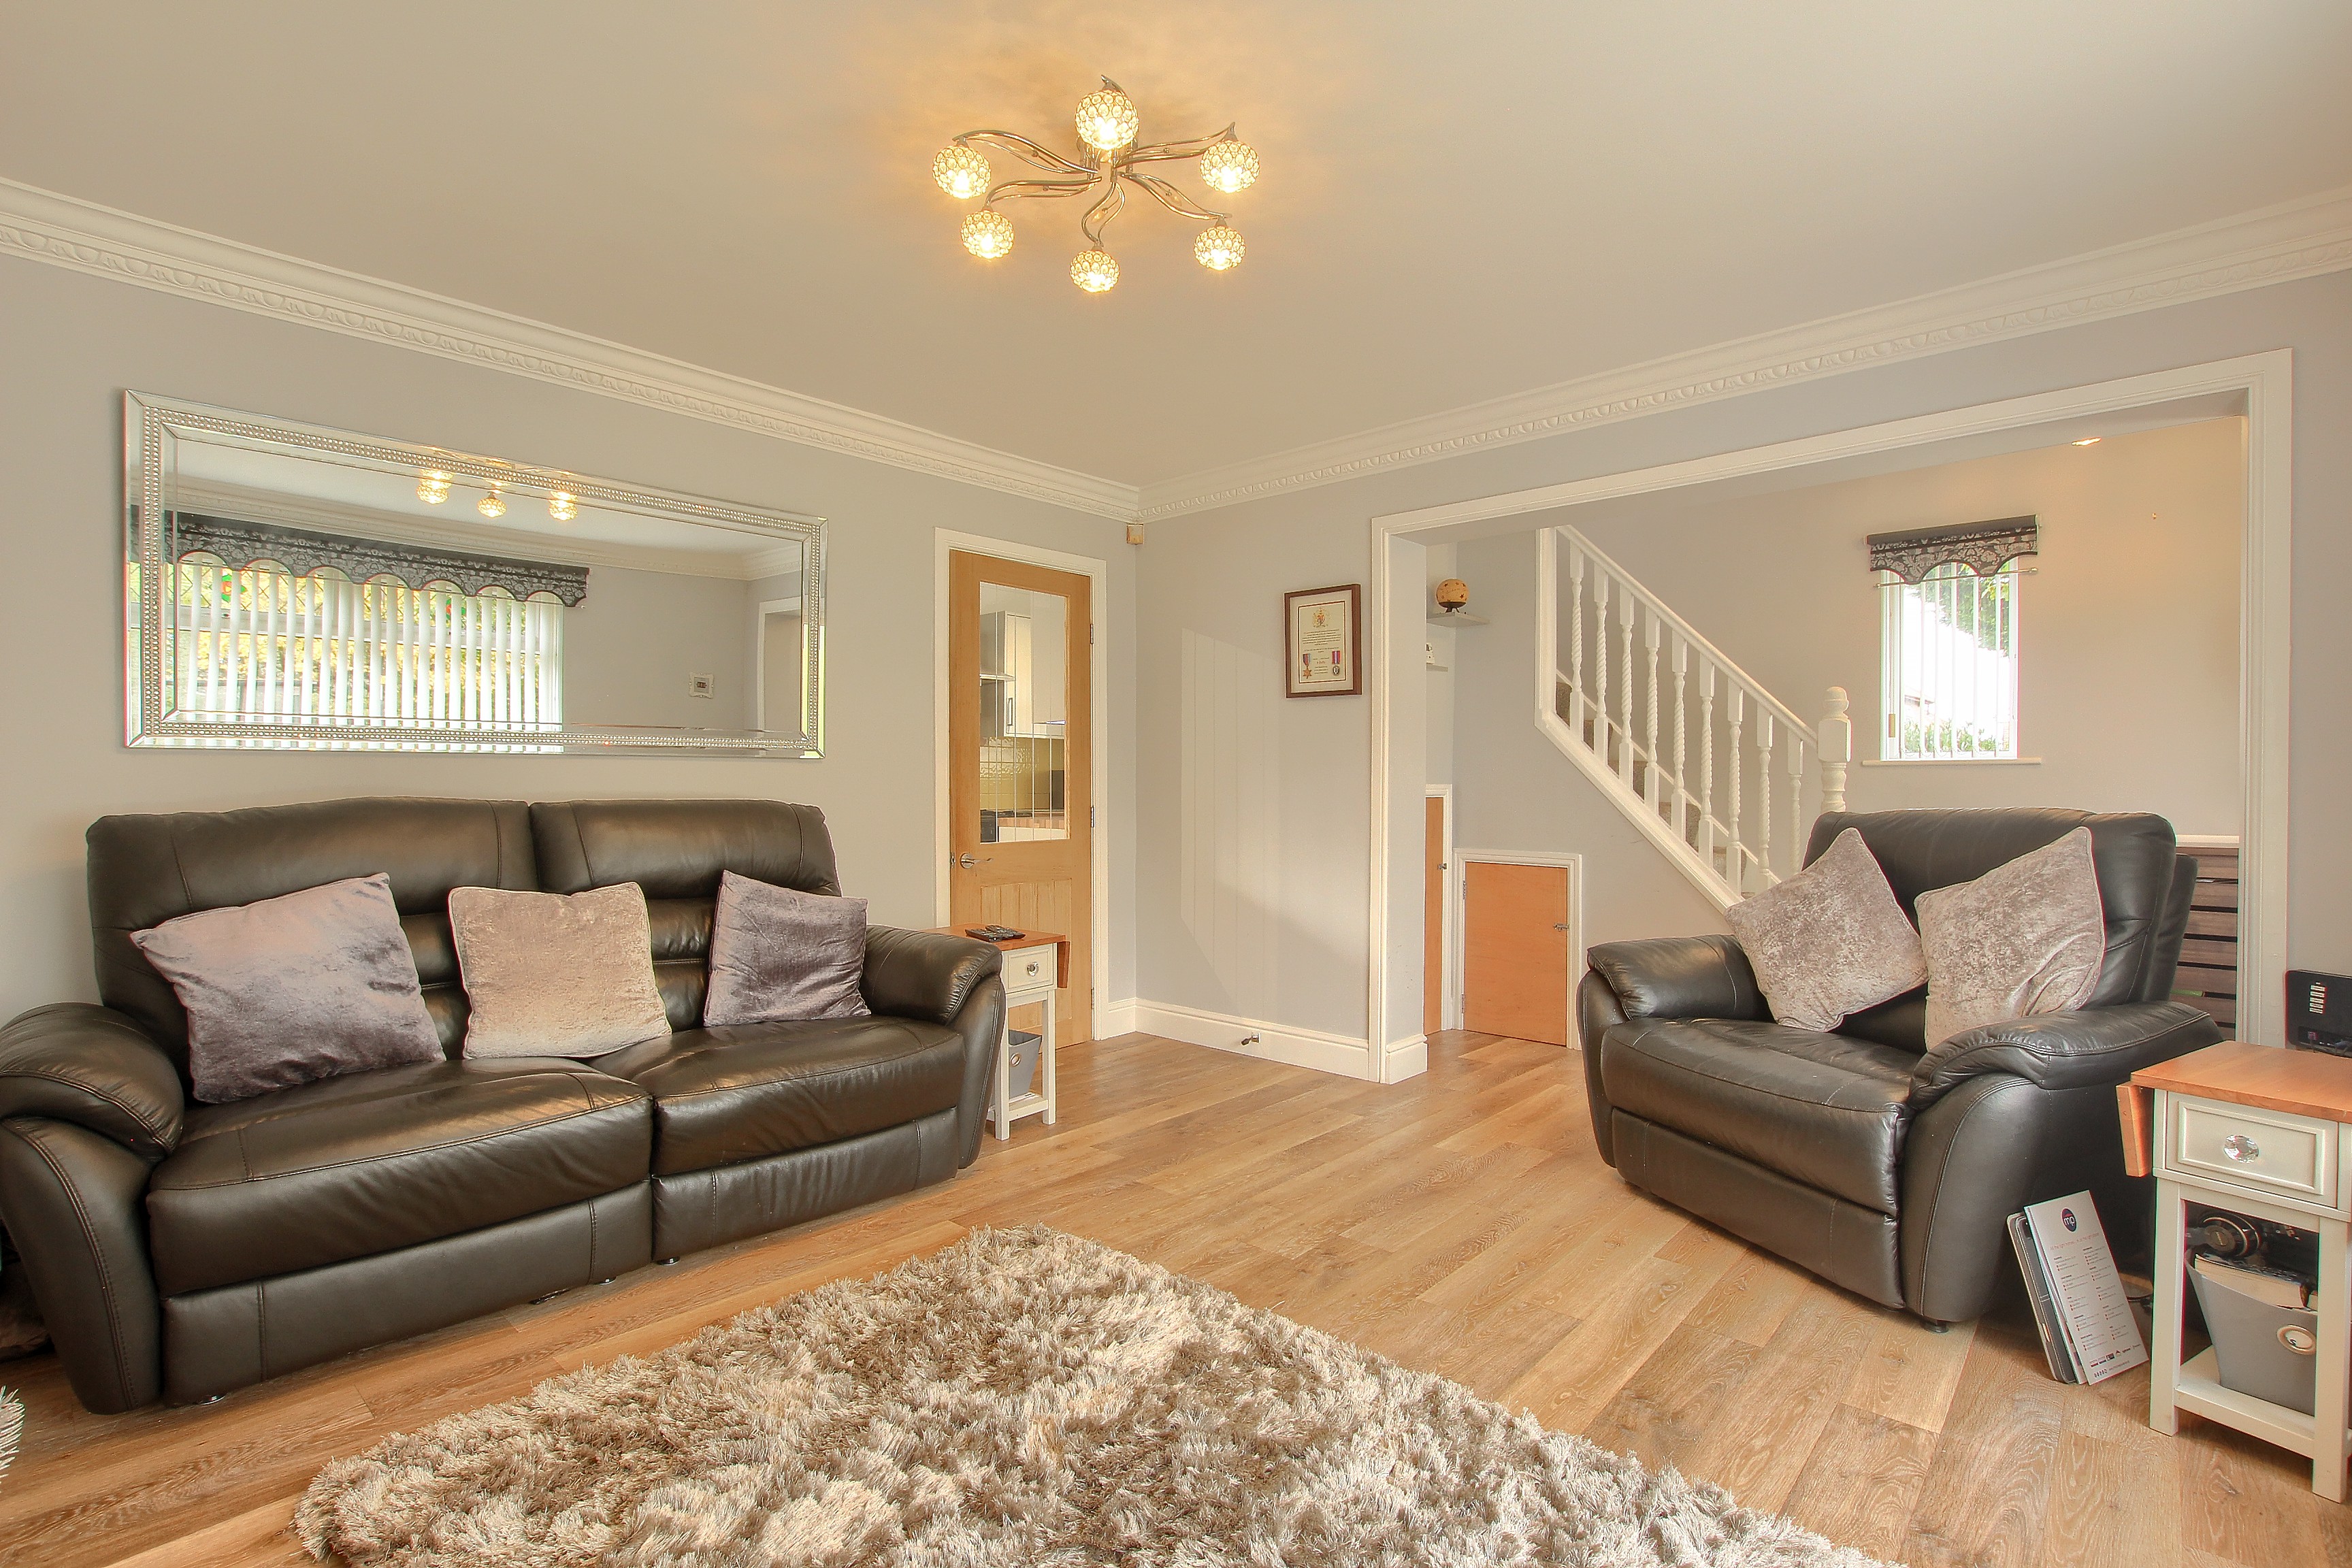 3 bed  for sale in Kelvin Grove, Park End  - Property Image 2